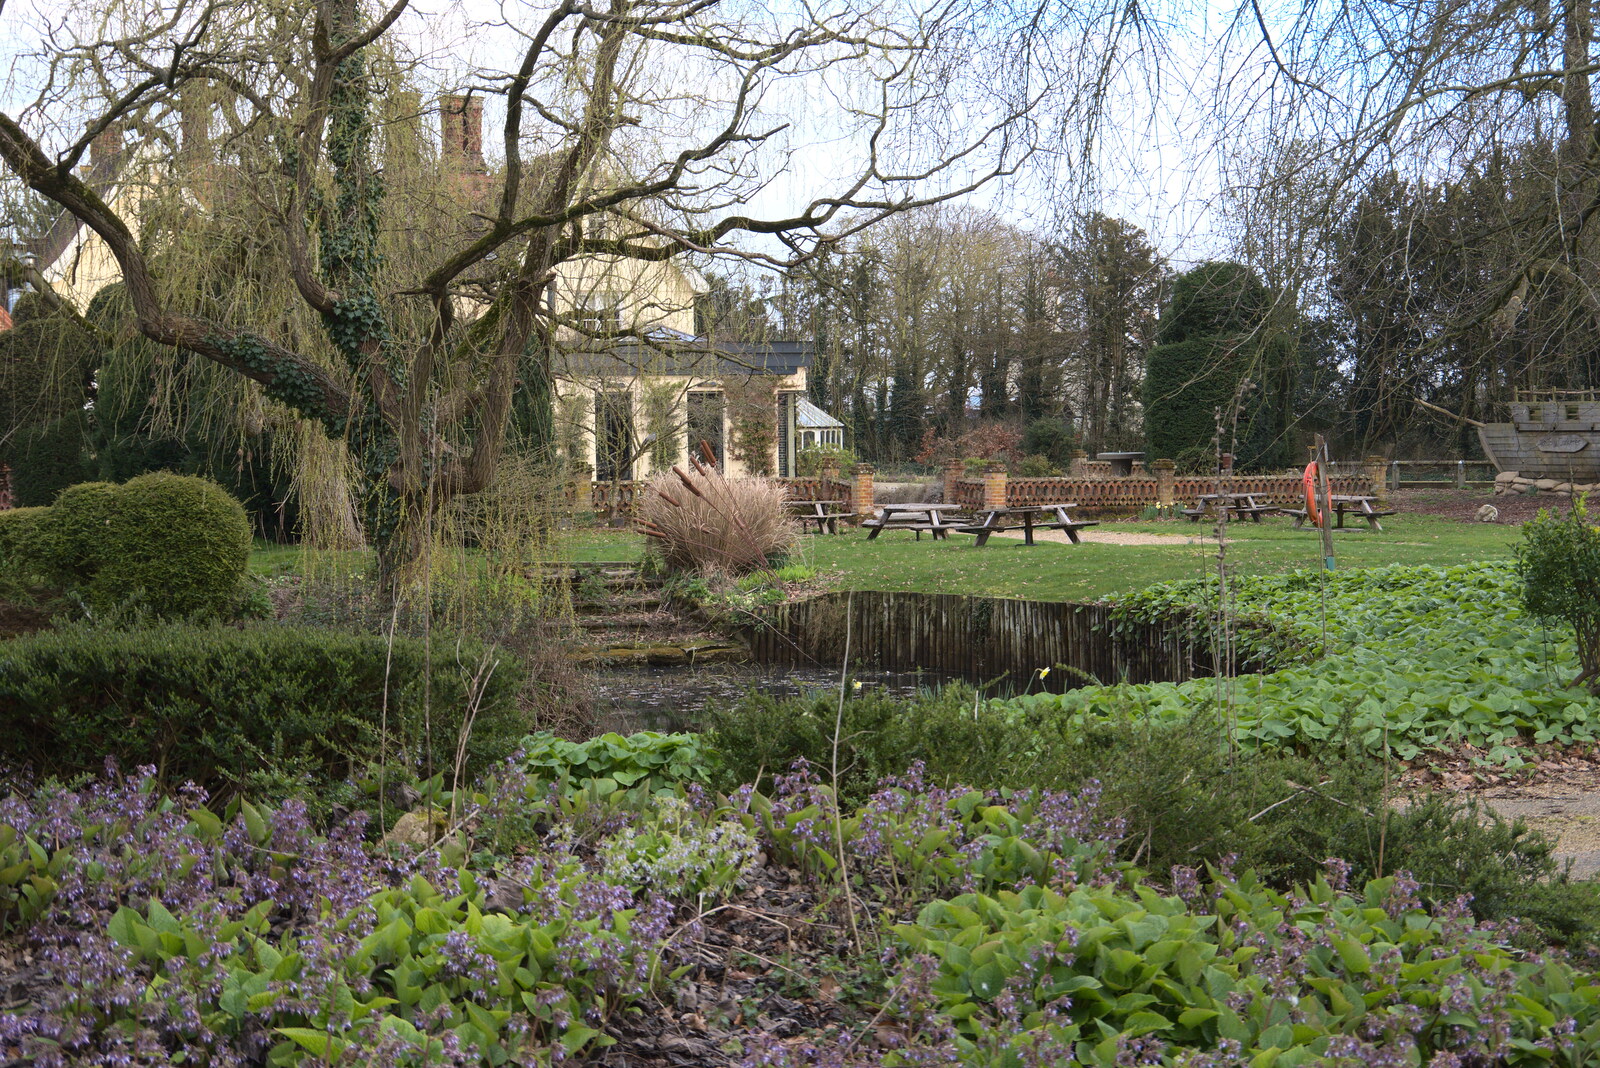 The Oaksmere's pond and gardens from The Oaksmere: 28 Weeks Later, Brome, Suffolk - 21st March 2021